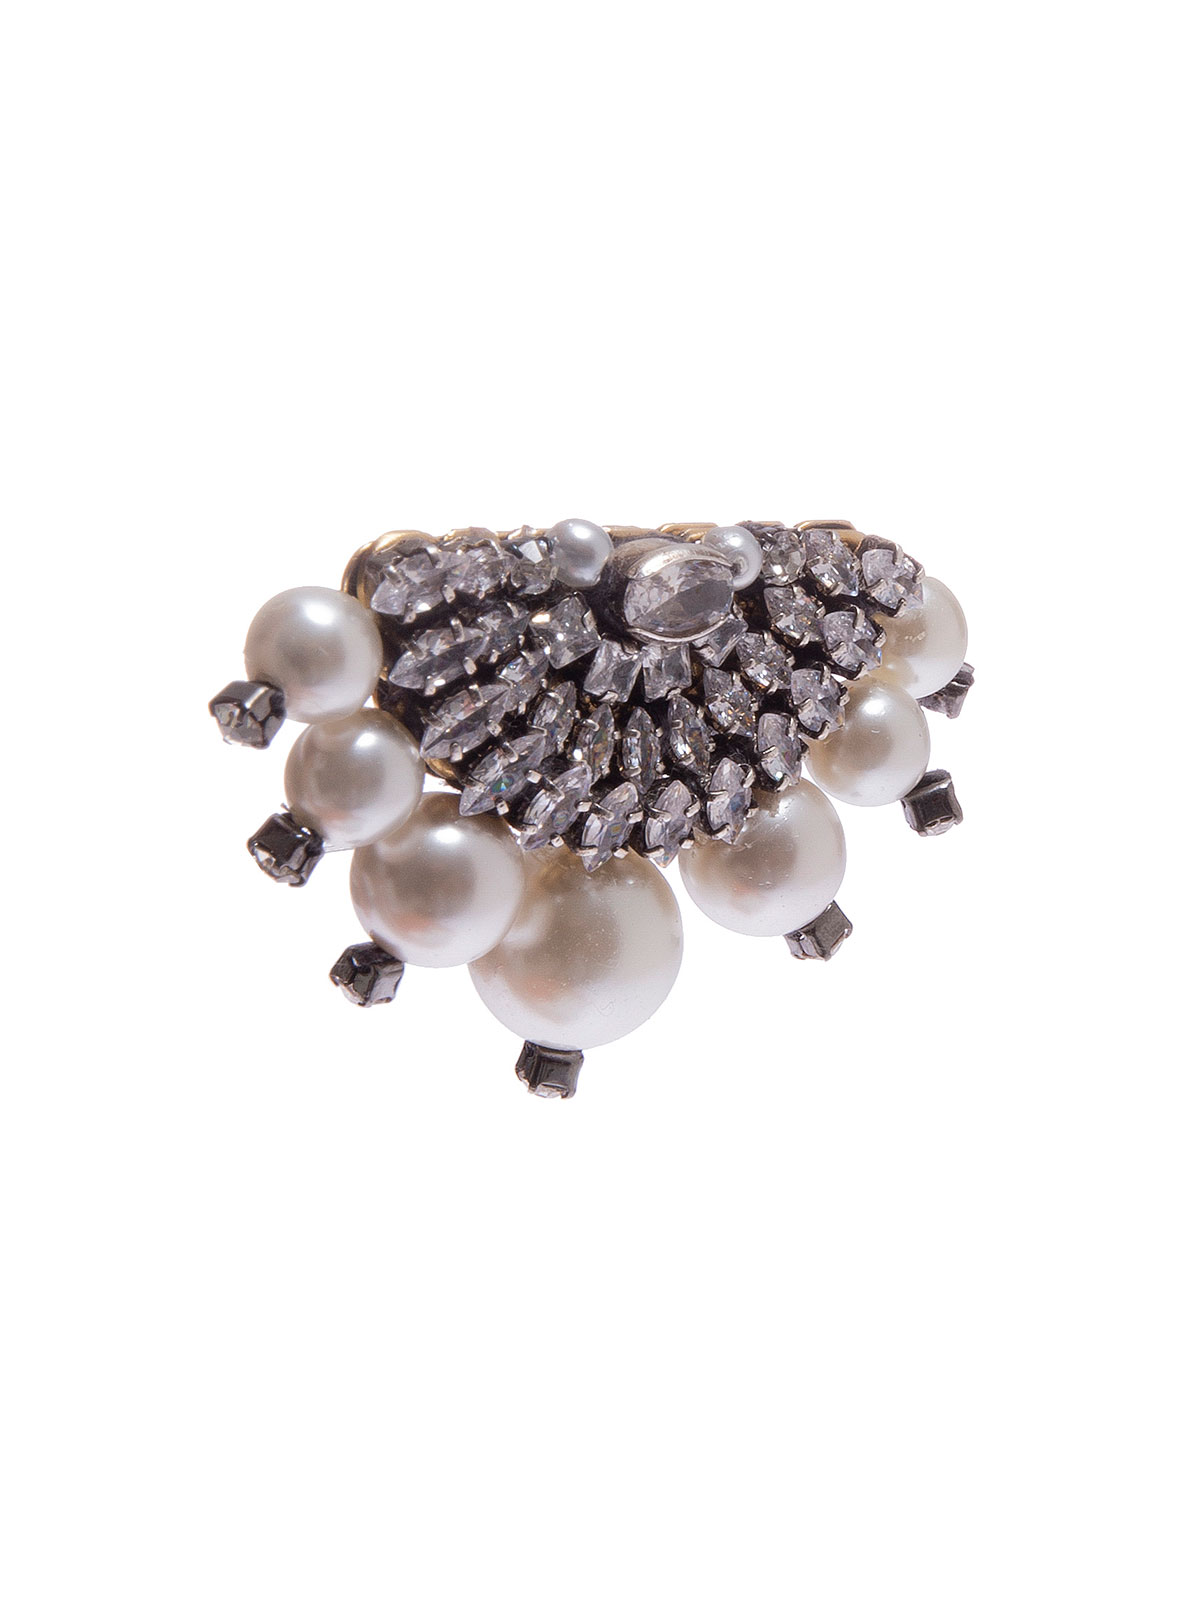 Crystal semicircle brooch embellished with pearls